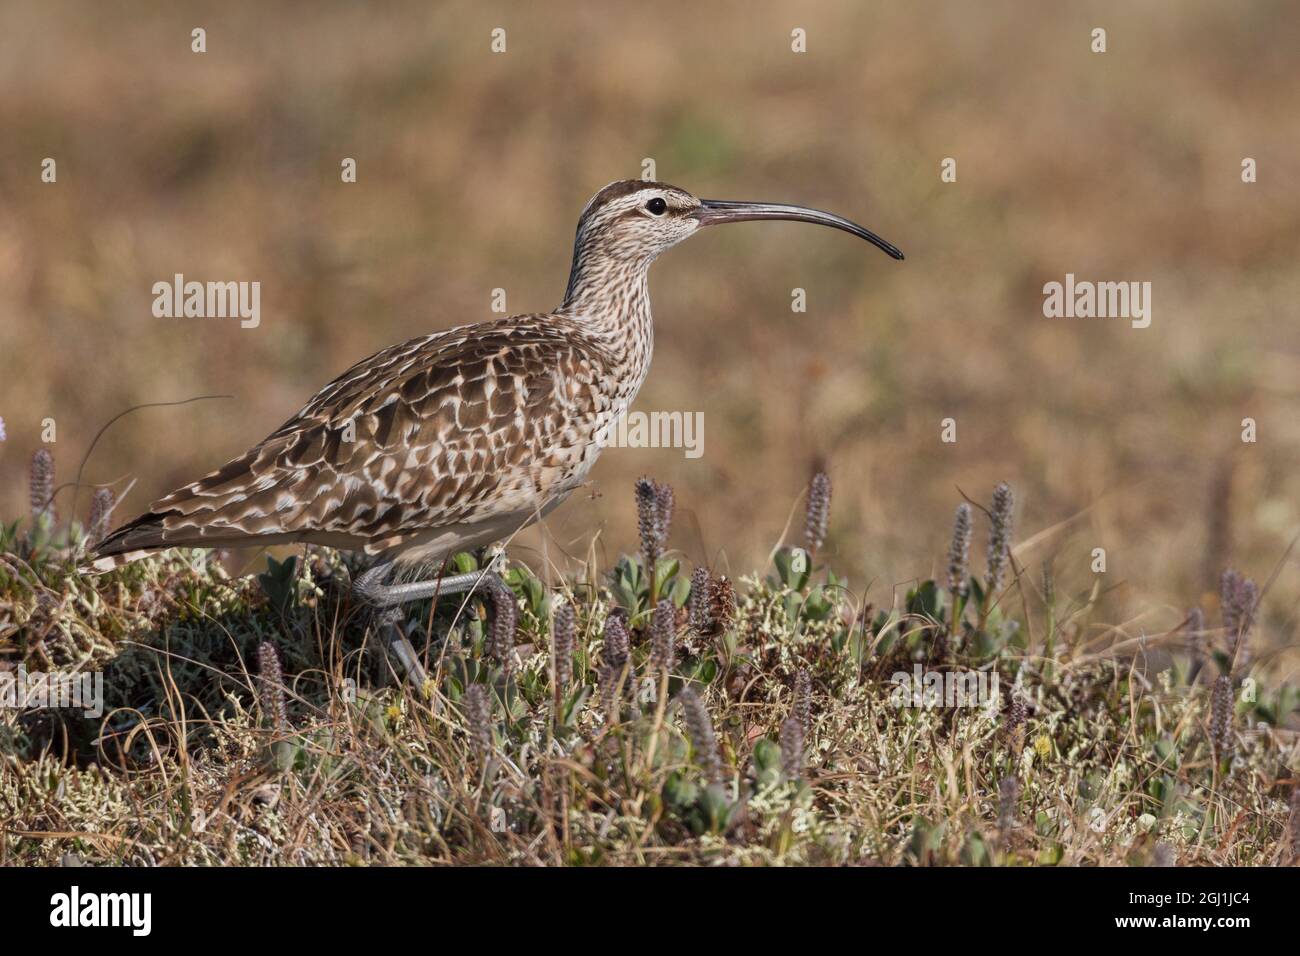 Bristled-thighed curlew, Artic tundra Stock Photo